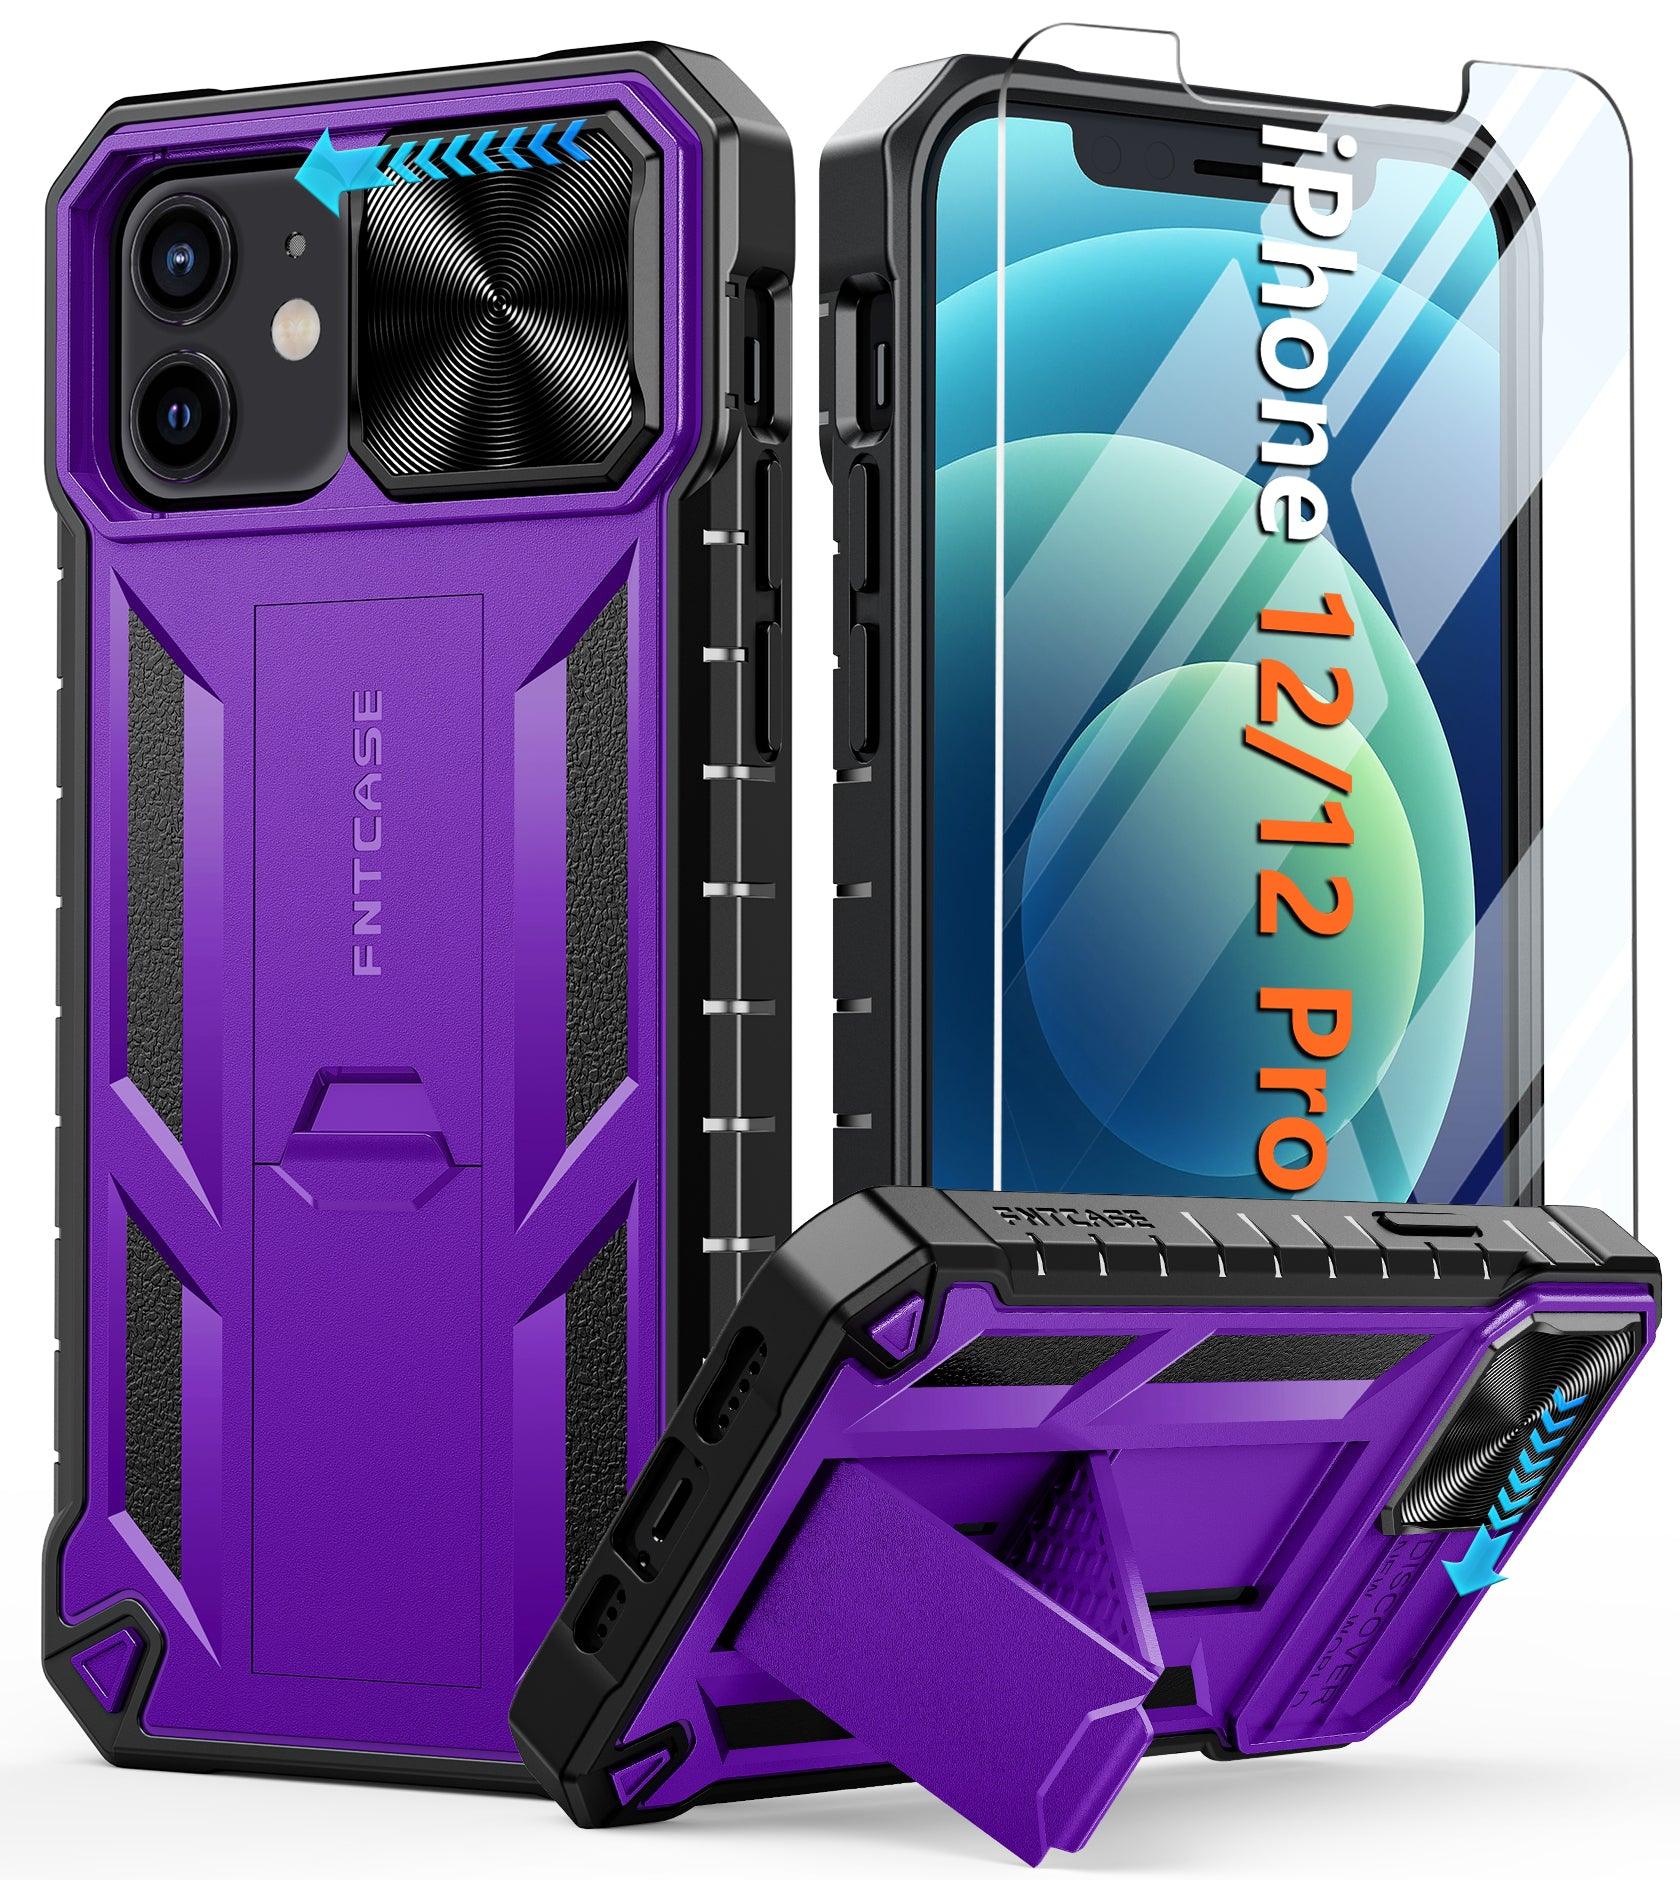 iPhone 12/12 Pro Military Grade Shockproof Protection Mobile Case Matte Textured Rugged TPU Shell with Kickstand and Slidable Camera Cover - FNTCASE OFFICIAL